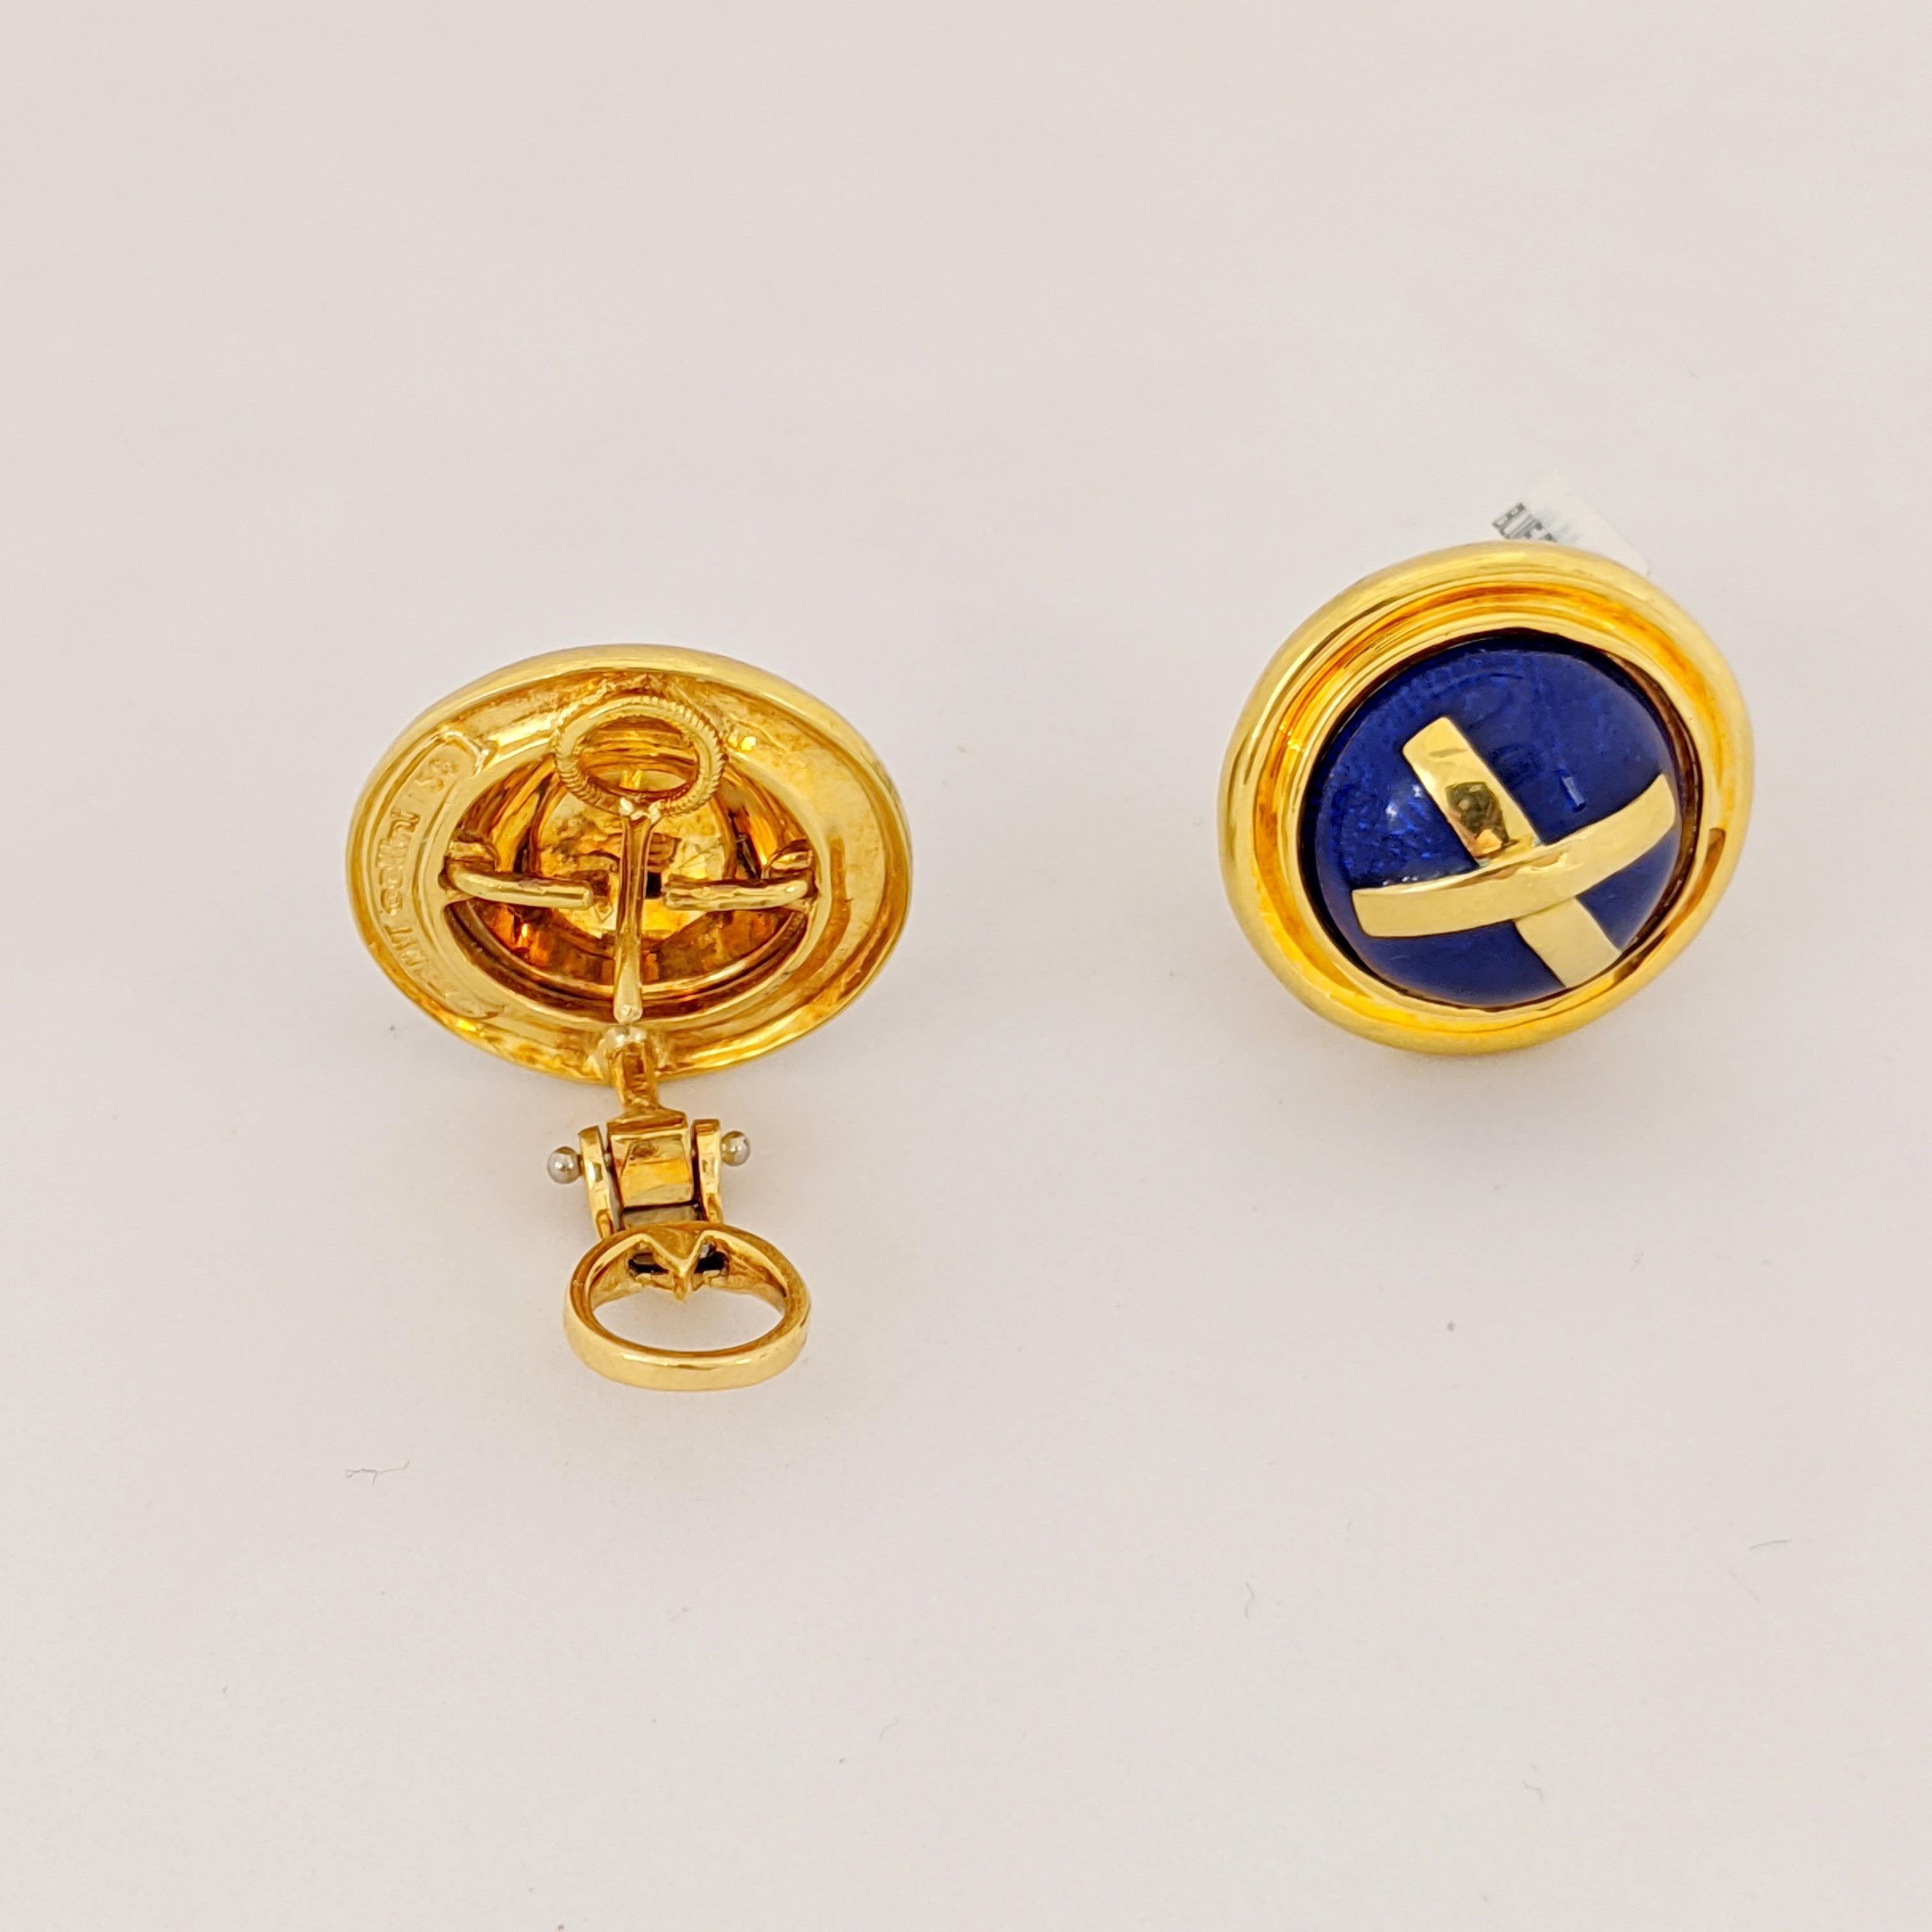 Contemporary Cellini Jewelers 18 Karat Gold Earrings with Blue Enamel and Yellow Gold 